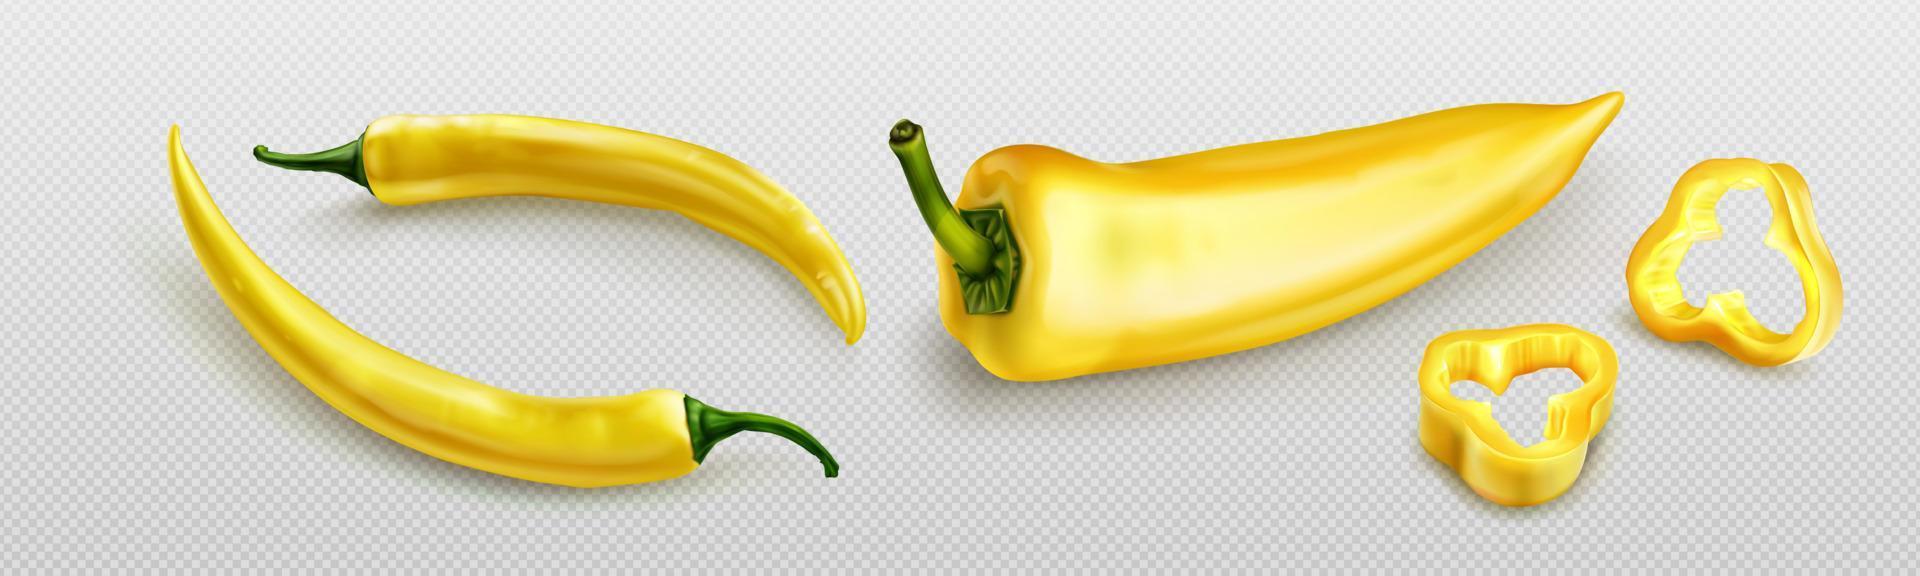 Yellow chili pepper or jalapeno hot spicy plant vector